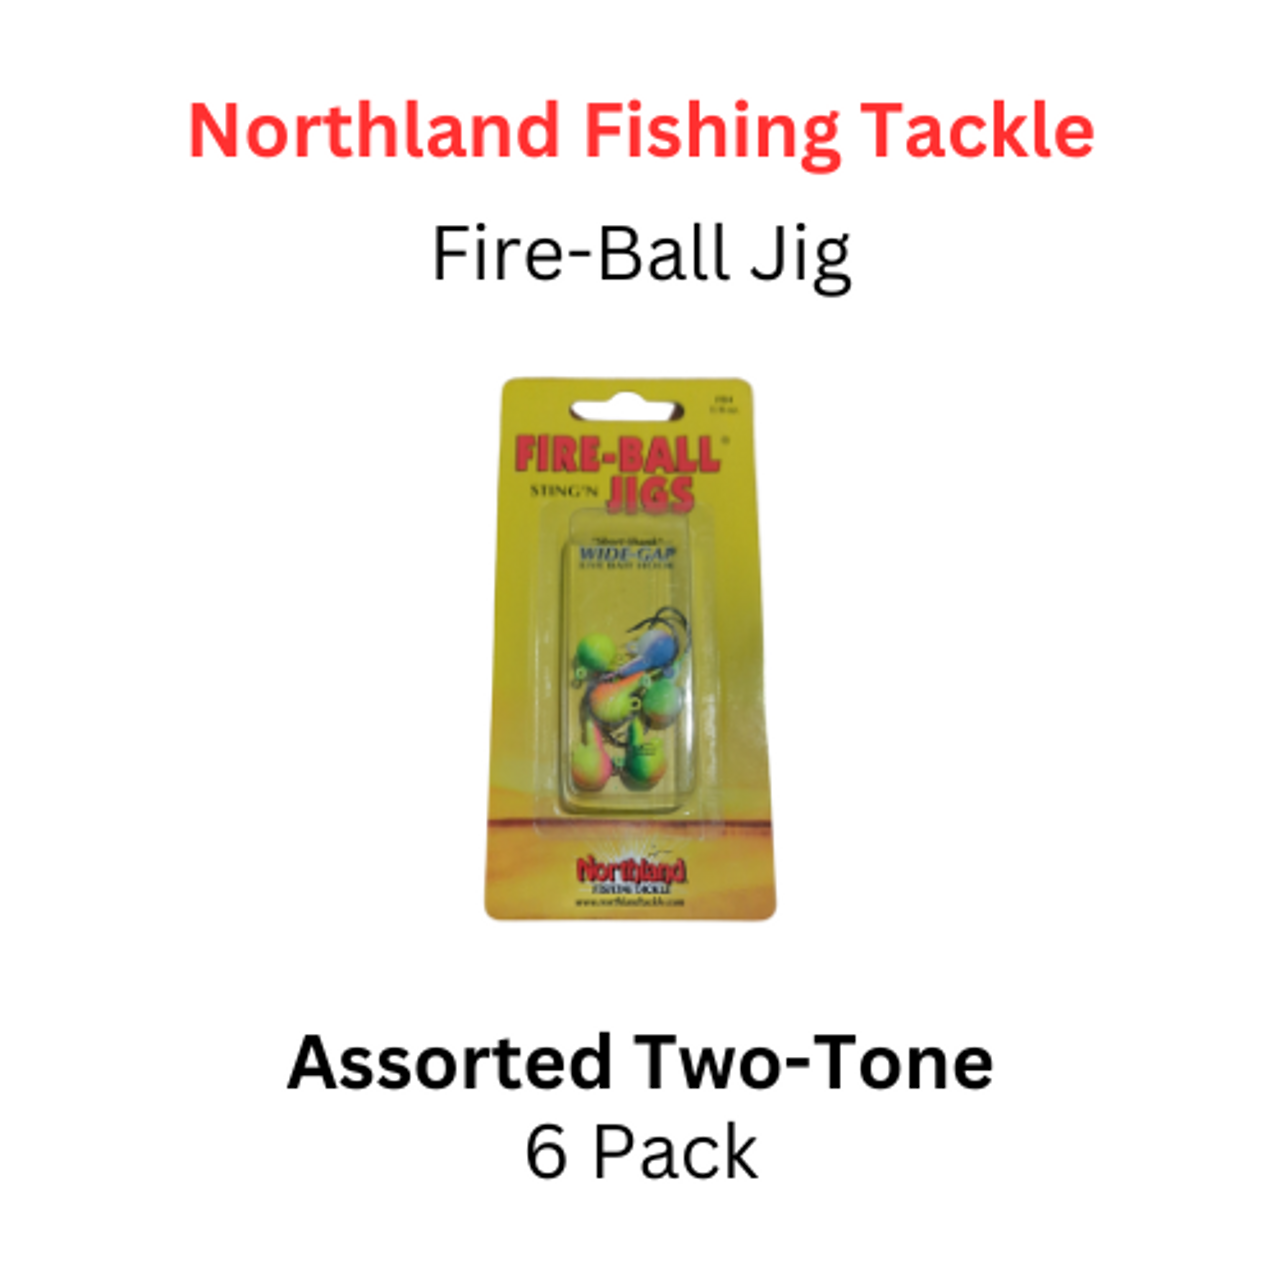 Northland Fishing Tackle: Fire-Ball Jig head 1/8oz two-tone assorted